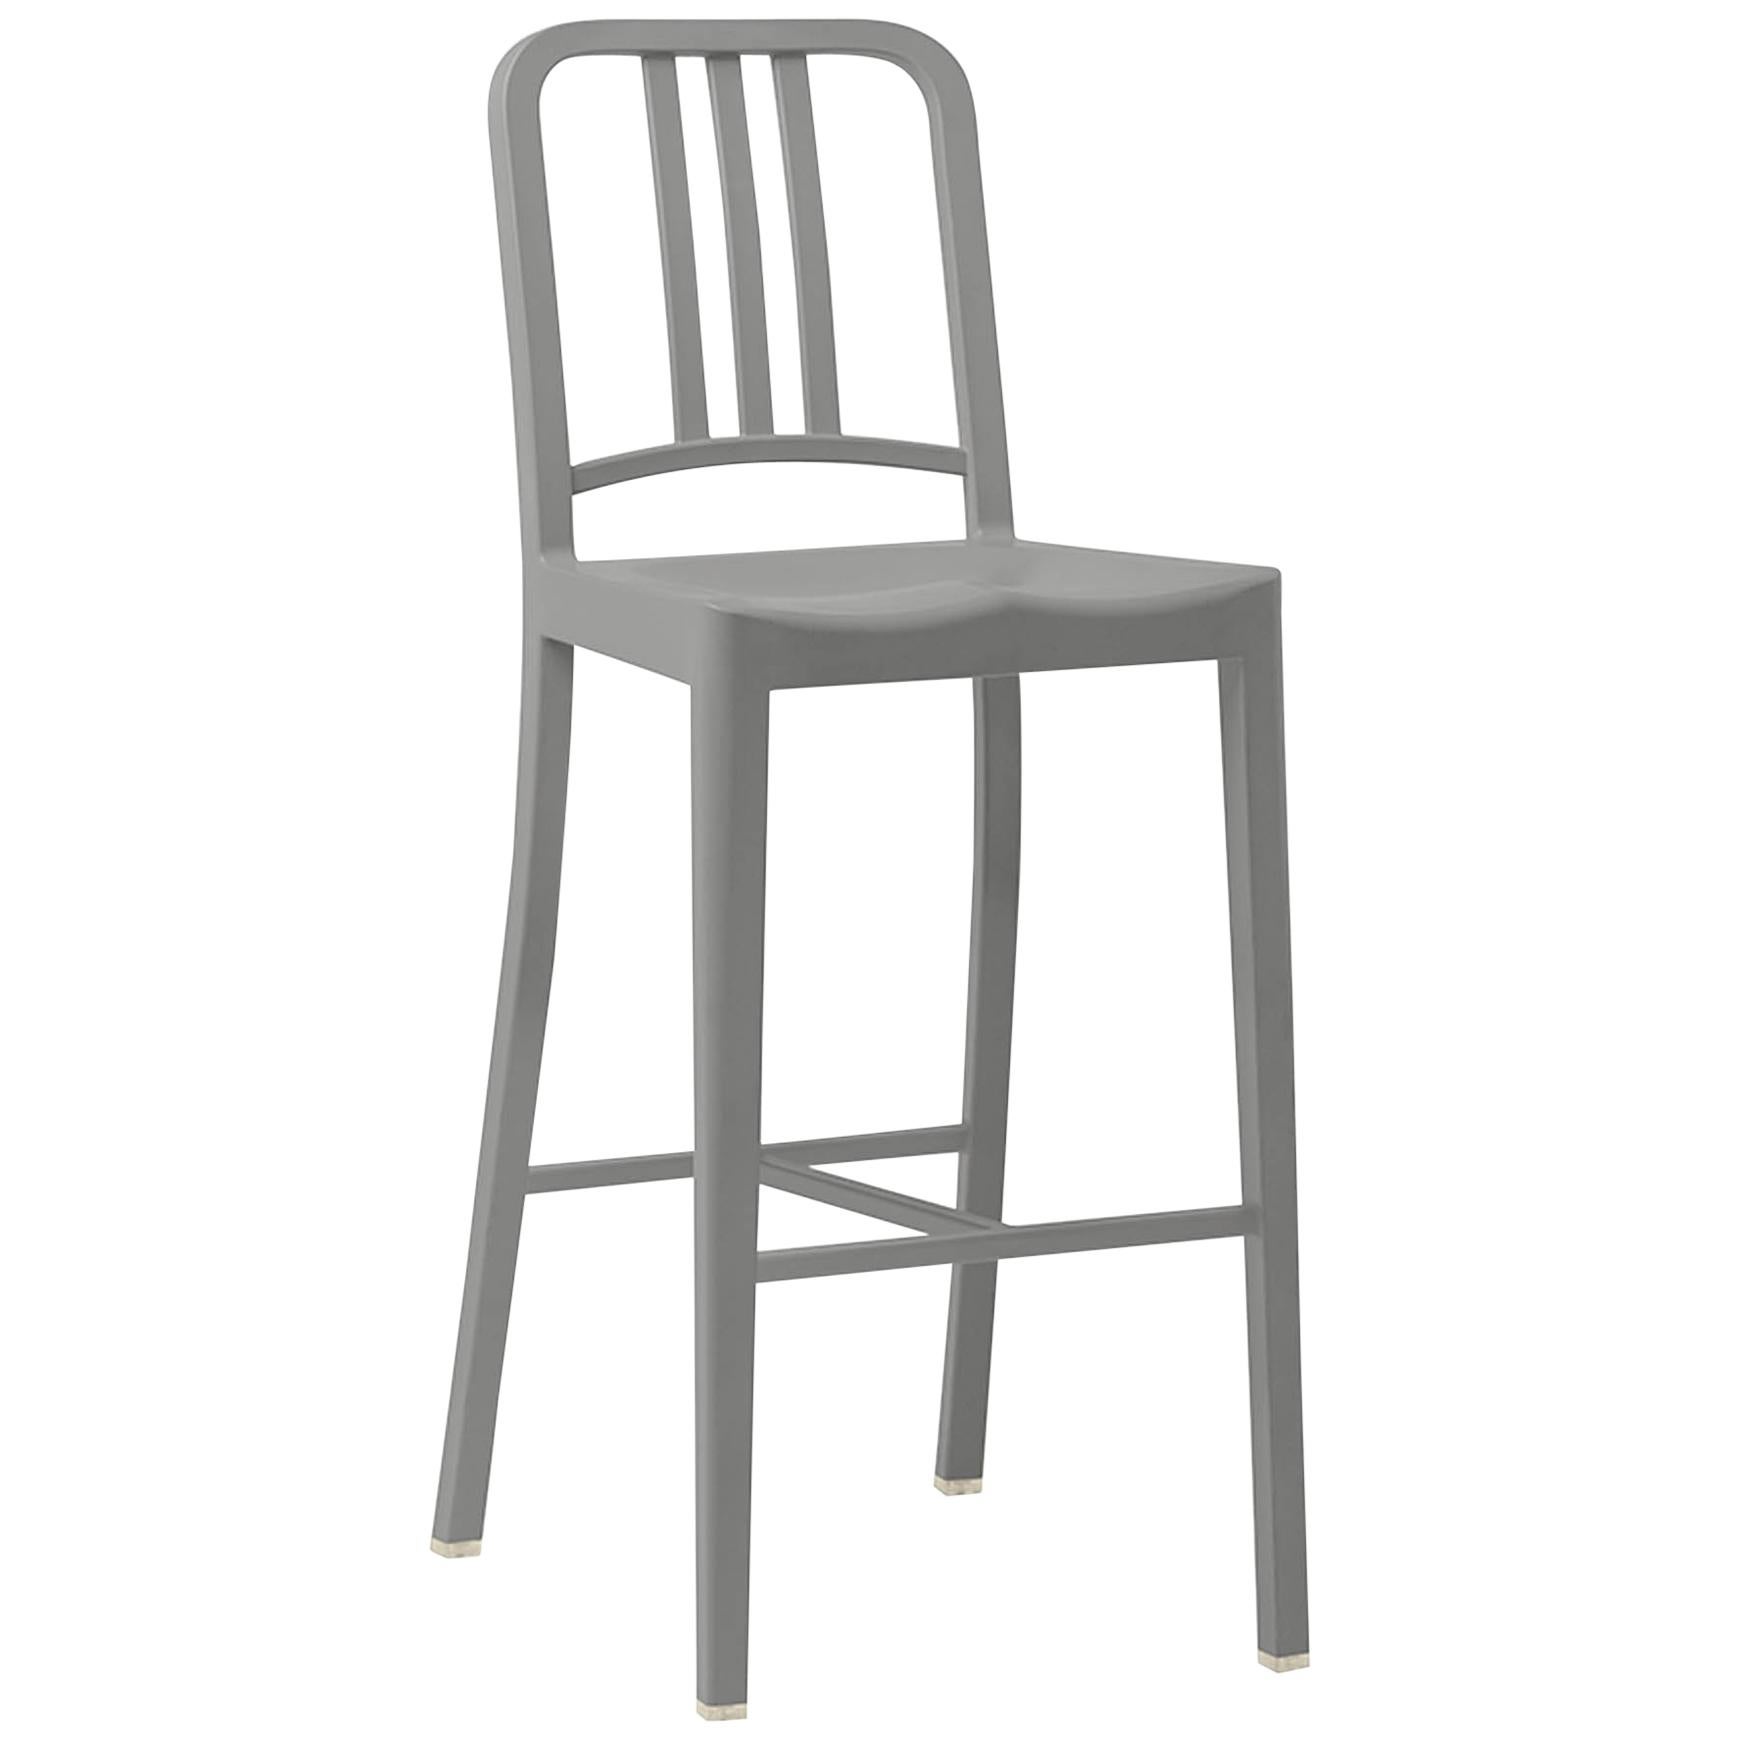 Emeco 111 Navy Barstool in Flint by Coca-Cola